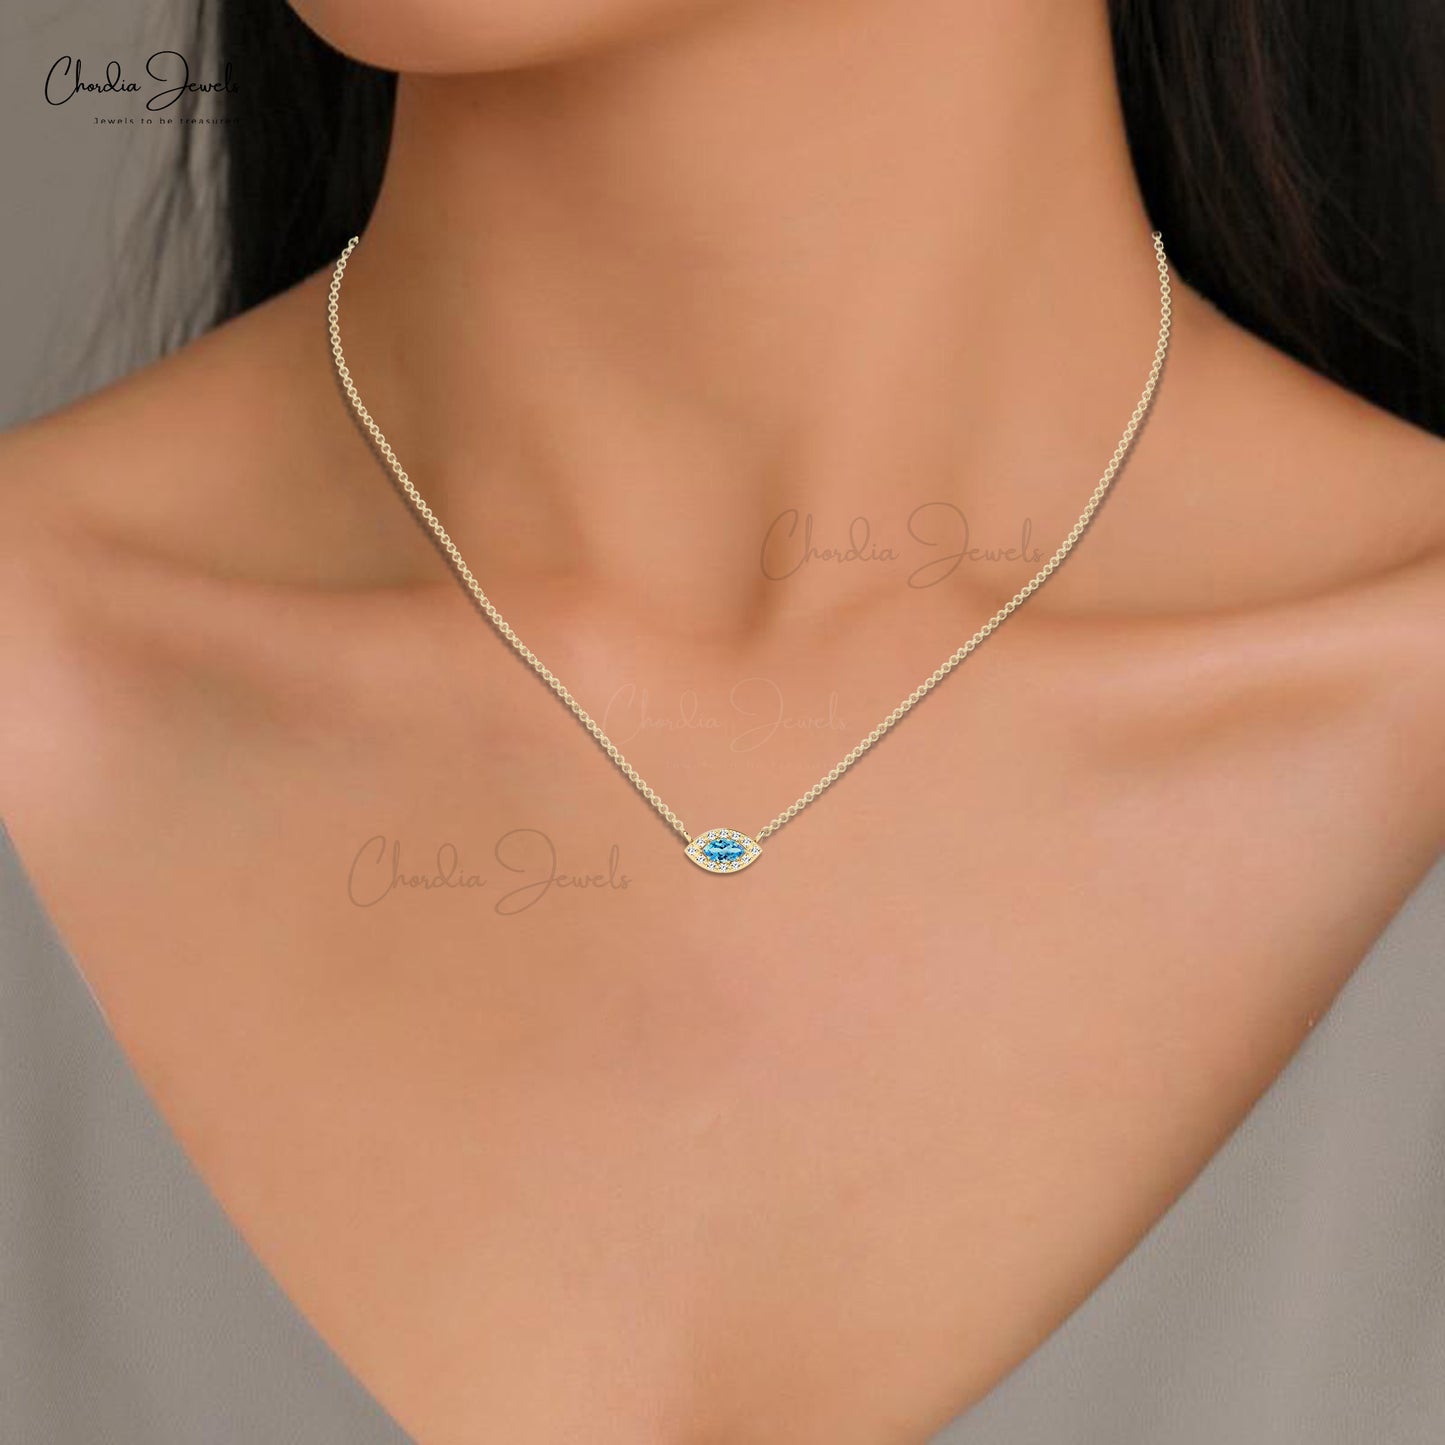 Classic Handmade Genuine White Diamond Halo Necklace 6x3mm Swiss Blue Topaz Charms Necklace Pendant in 14k Pure Gold Wedding Gift